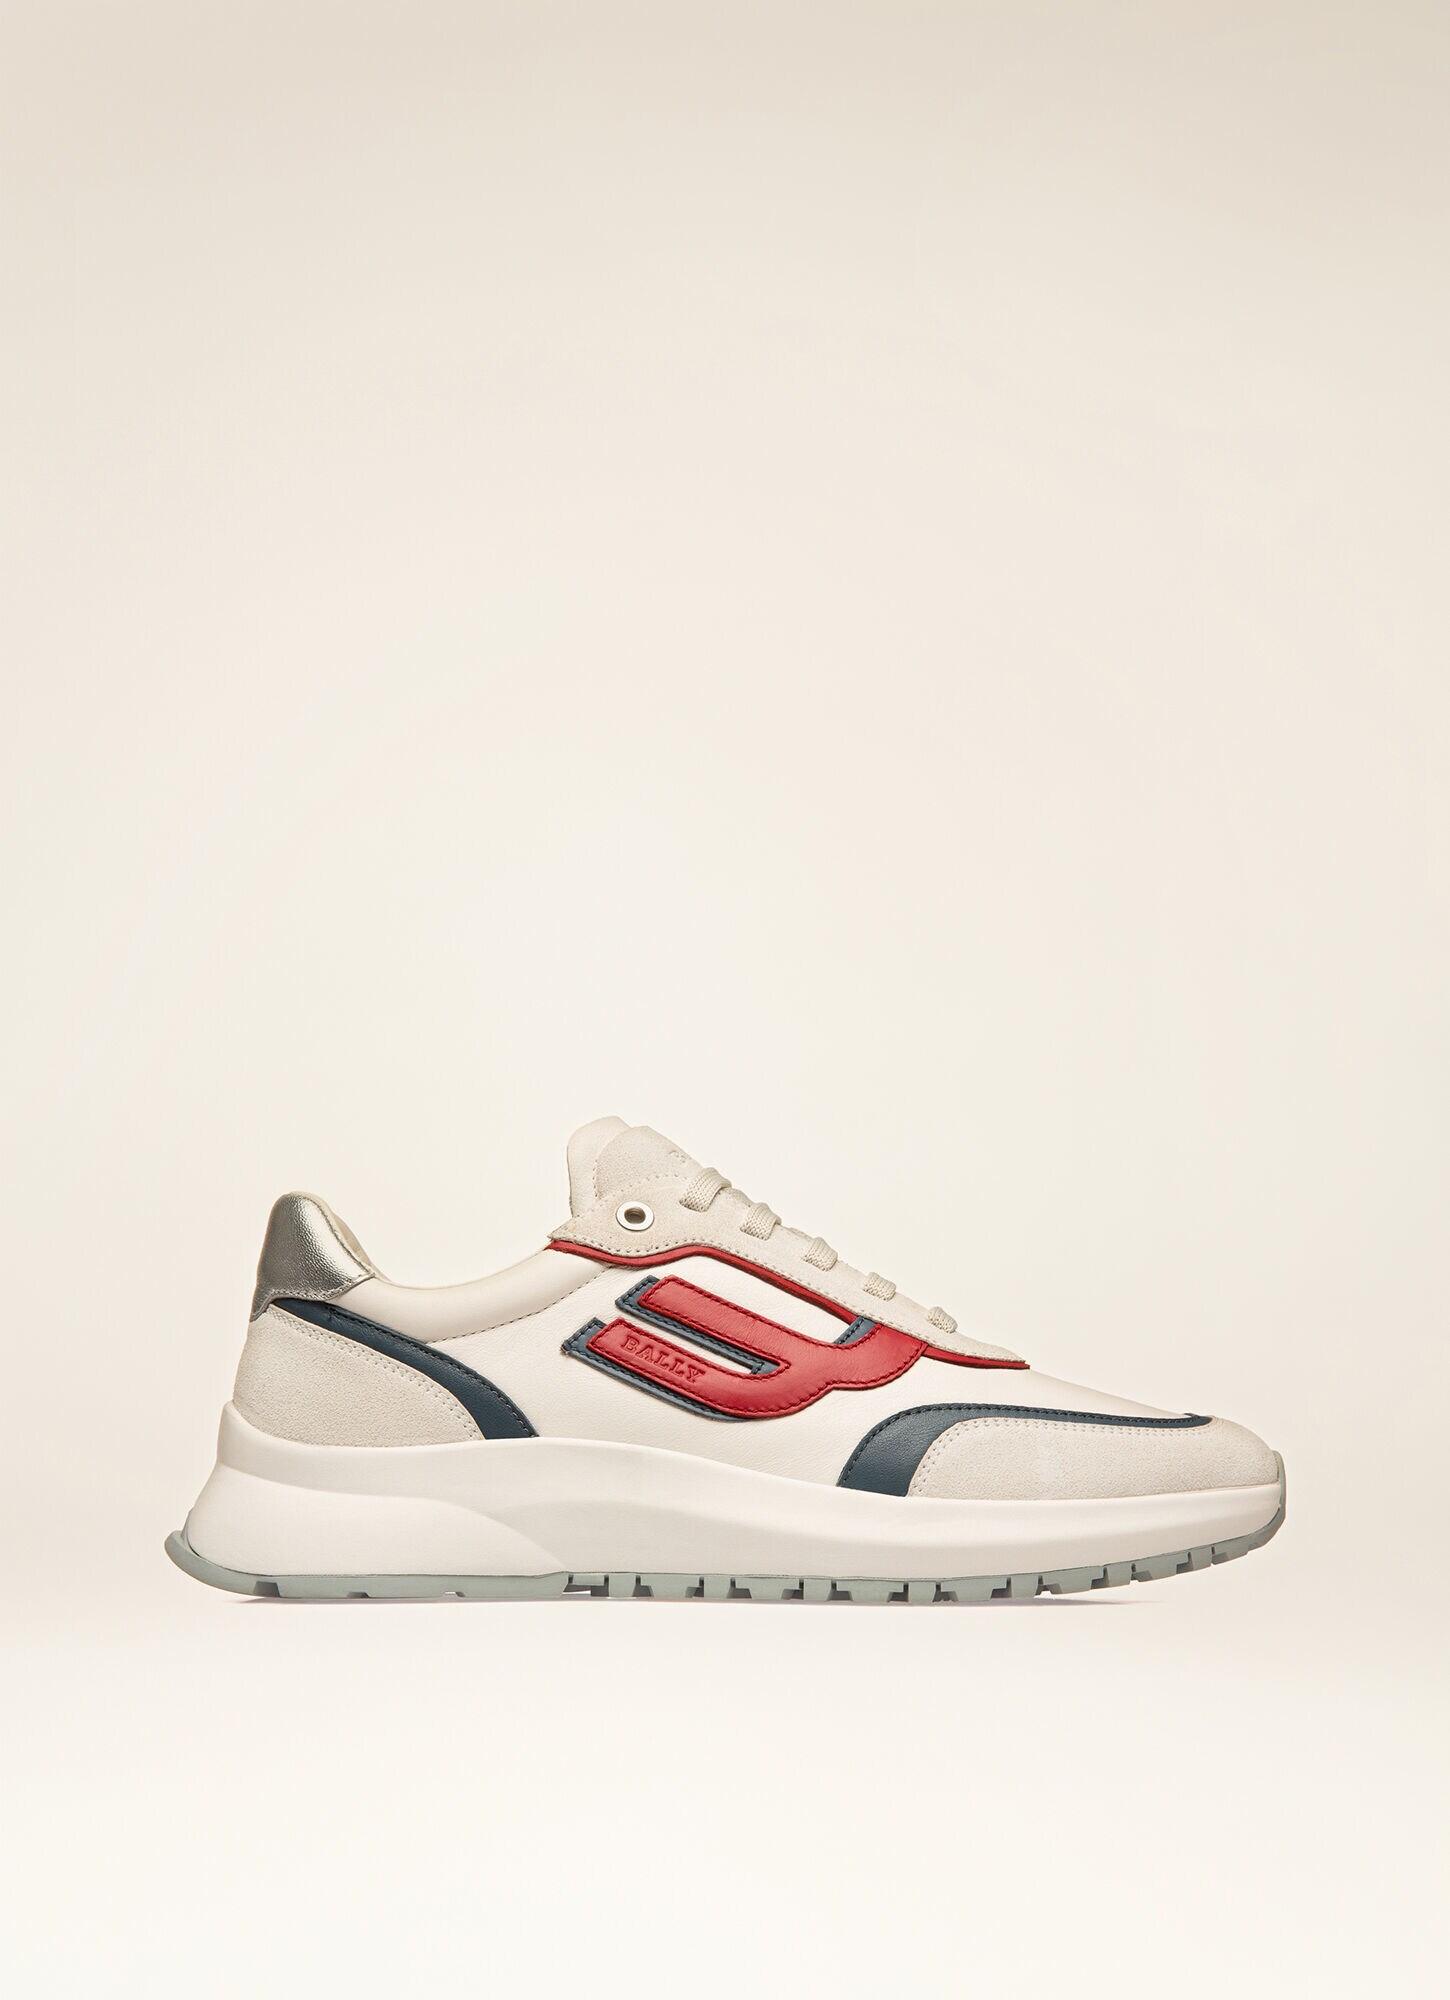 Demmy | Men's Sneakers | White Leather | Bally